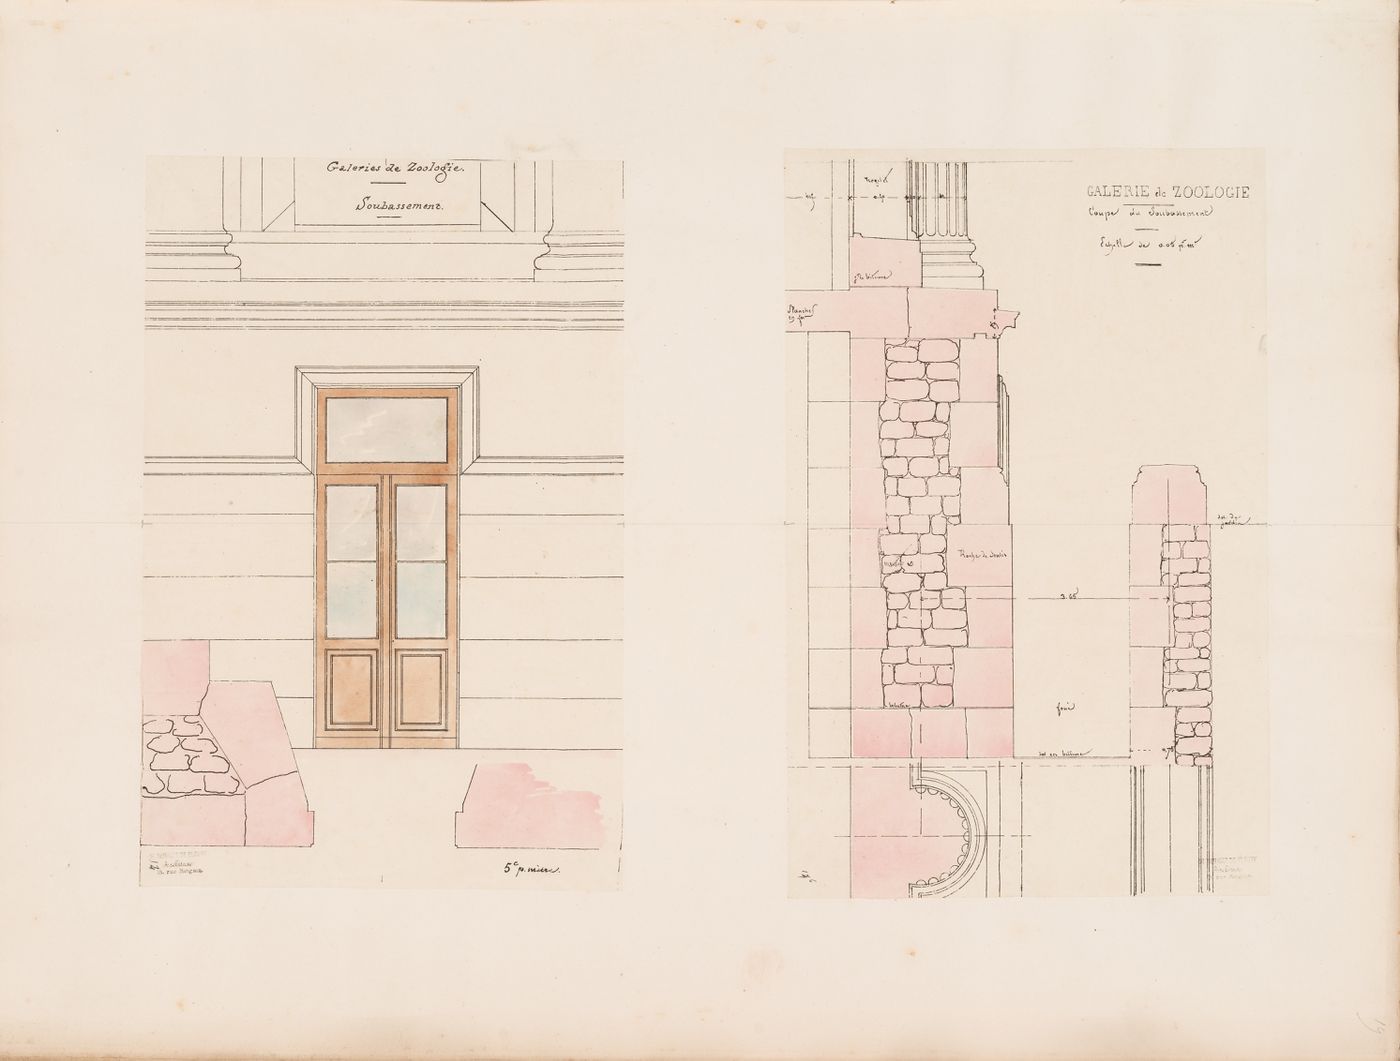 Project for a Galerie de zoologie, 1846: Partial elevation, partial plans and a wall section for the "soubassement"